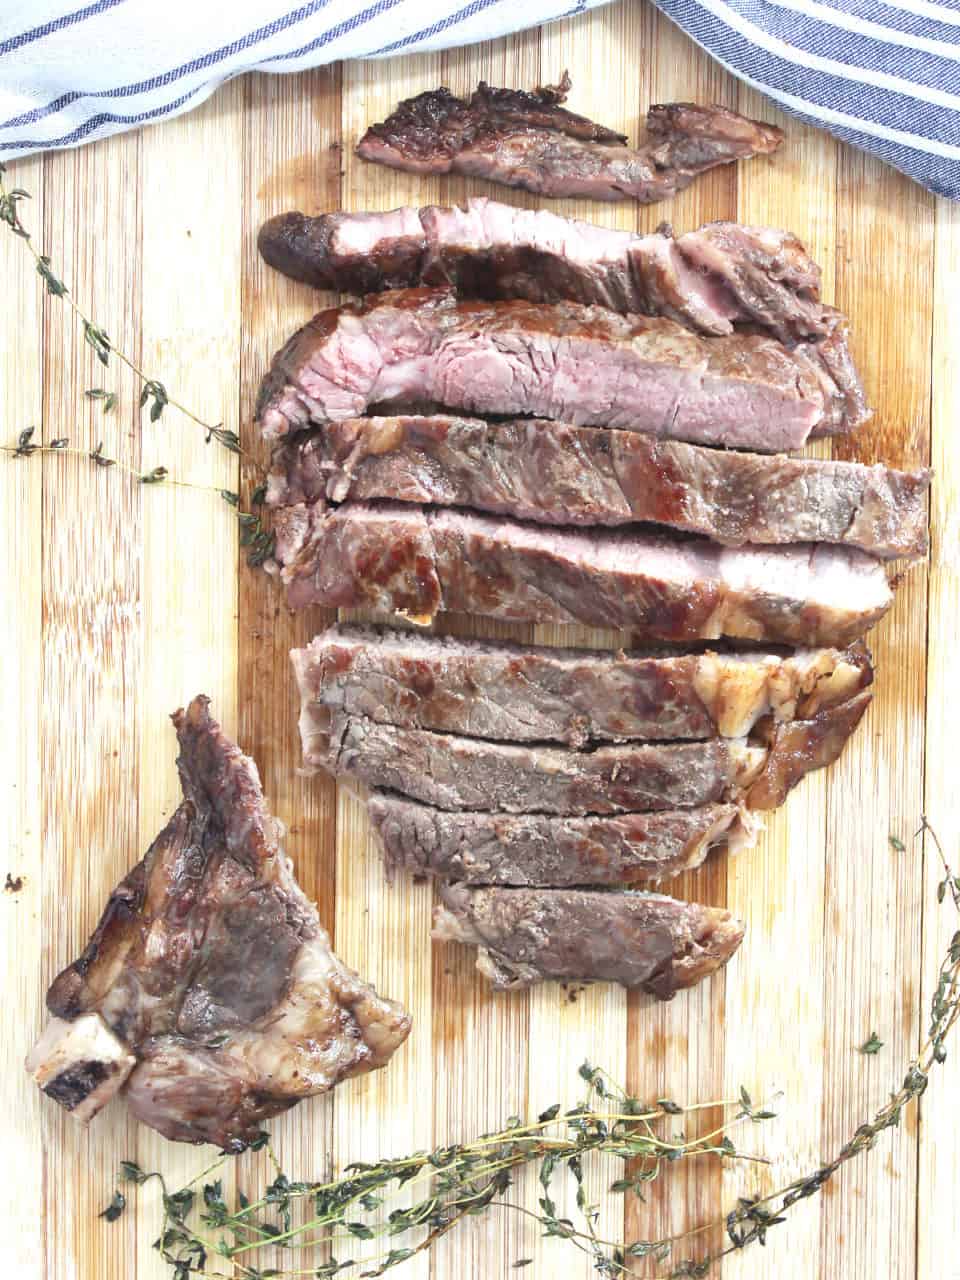 Coffee steak cut into slices next to sprigs of fresh thyme